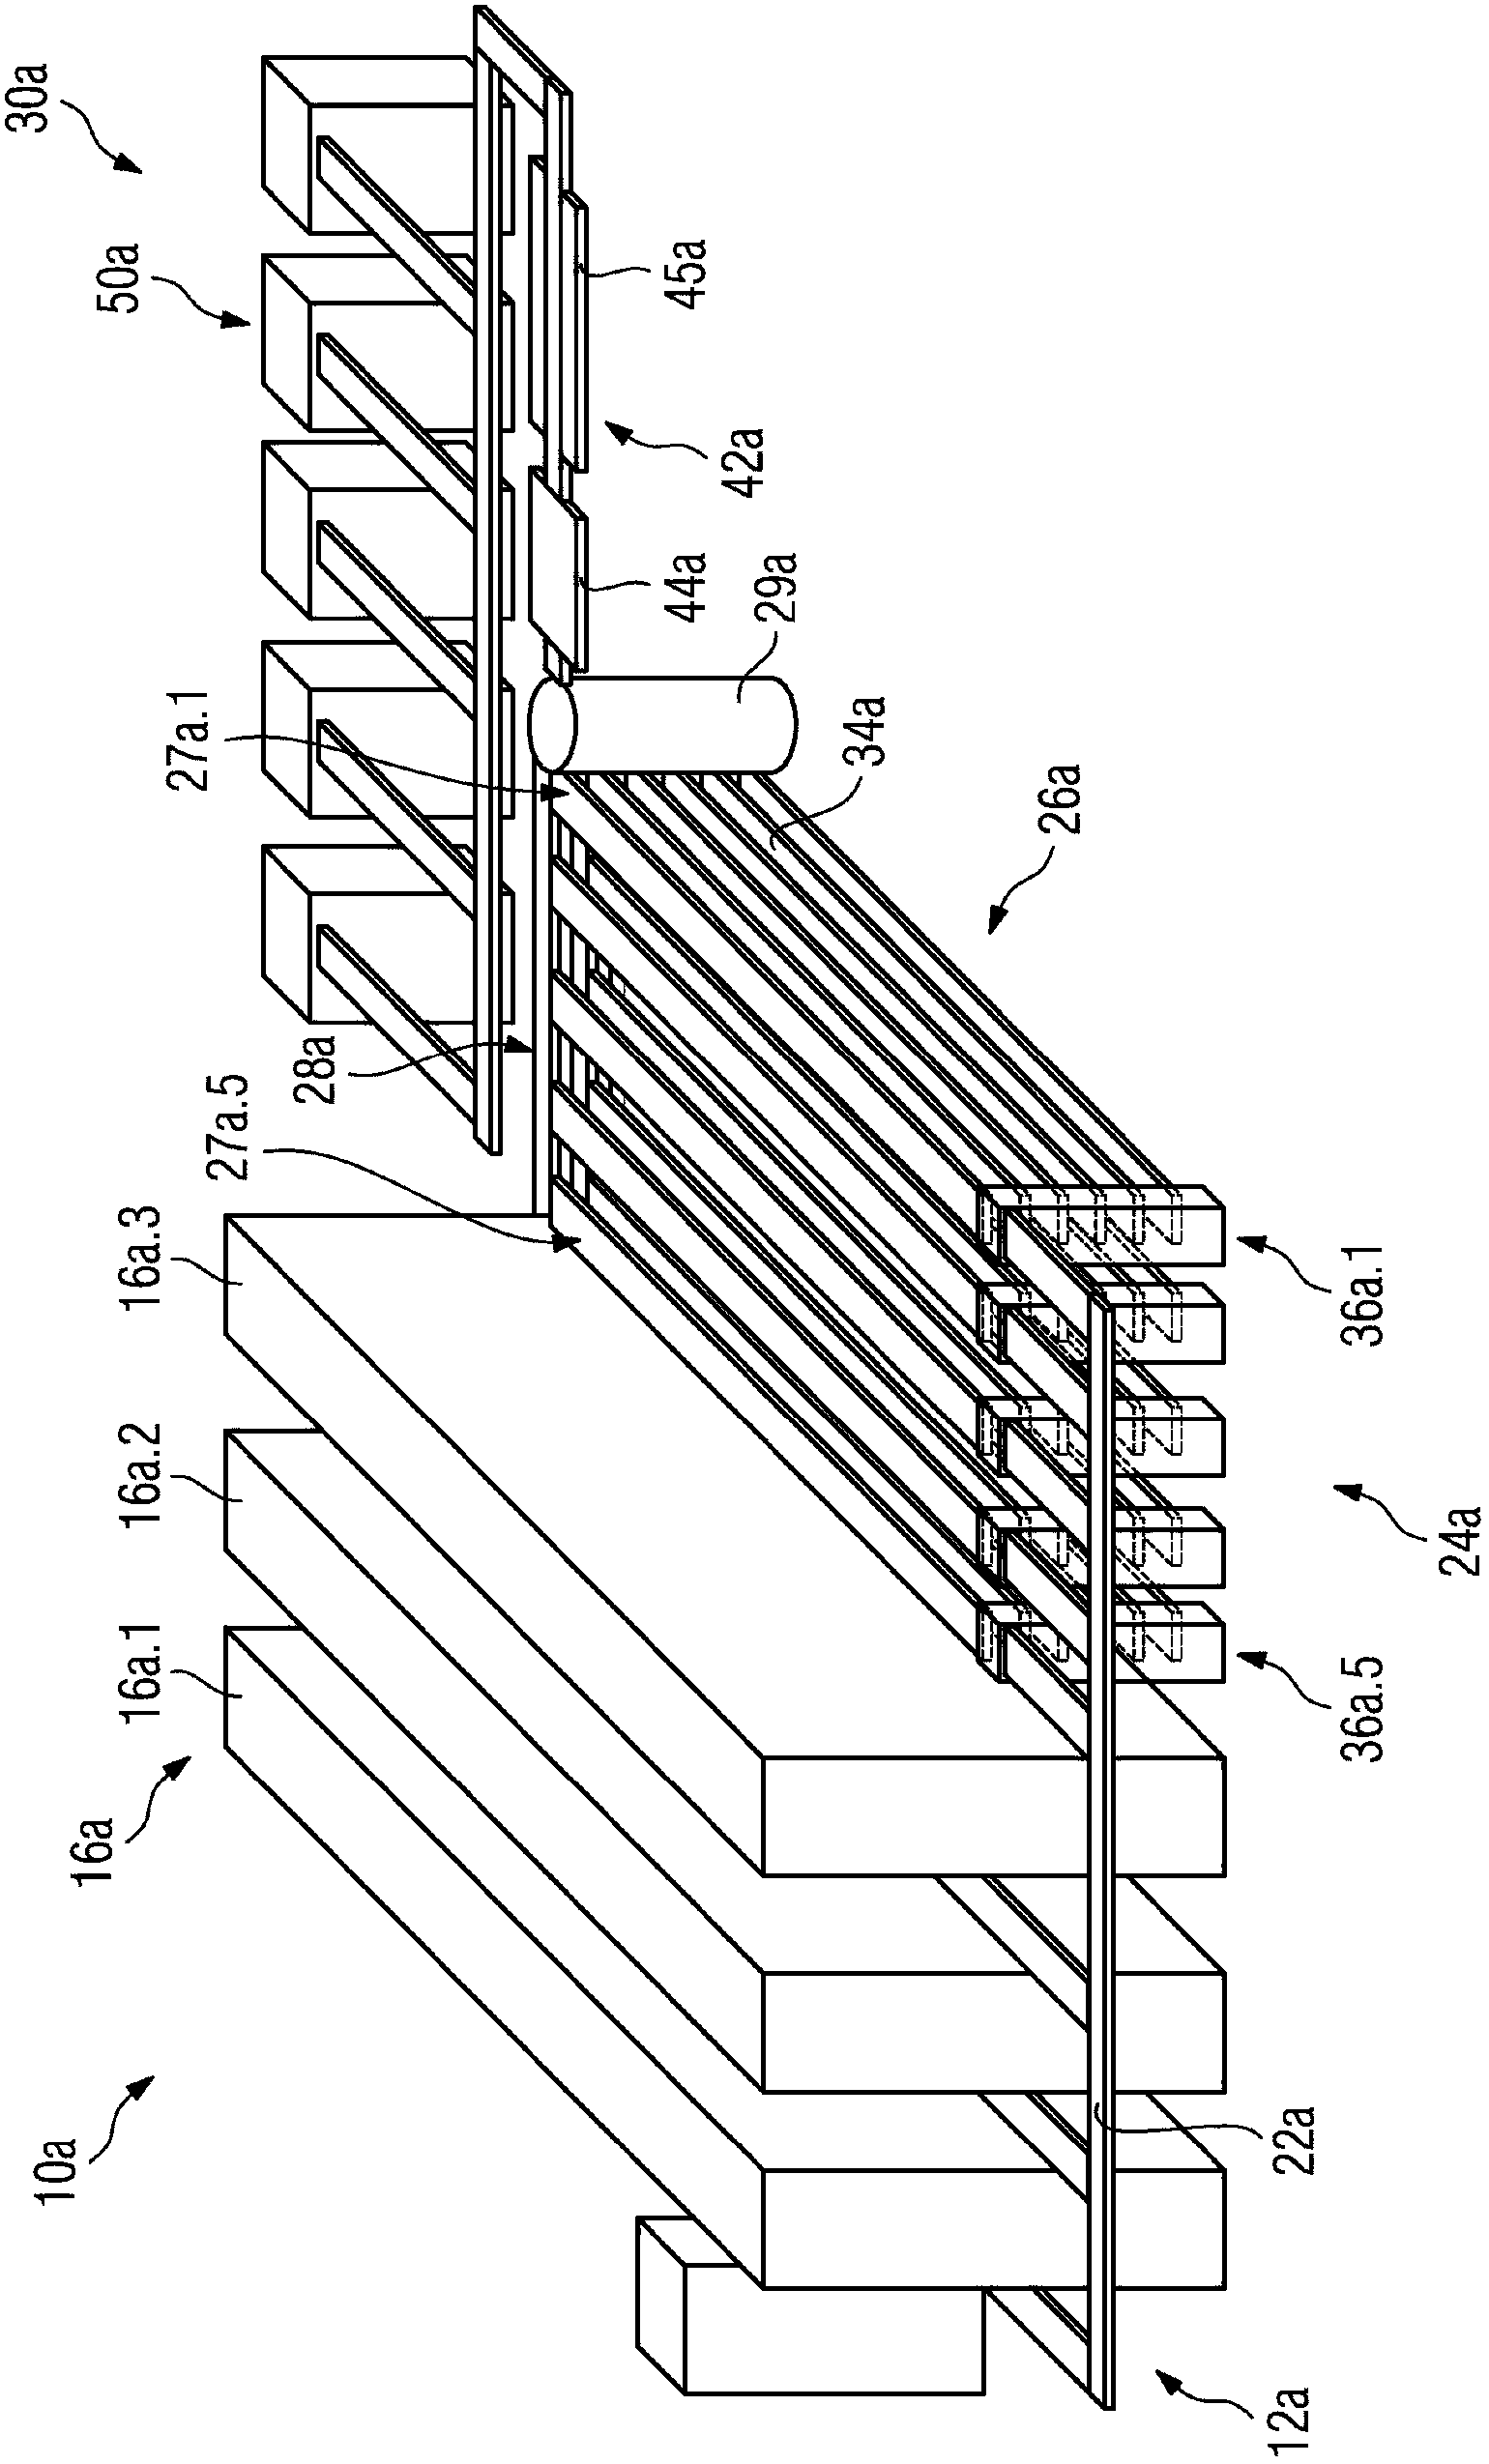 Loading system and method for loading packaged items